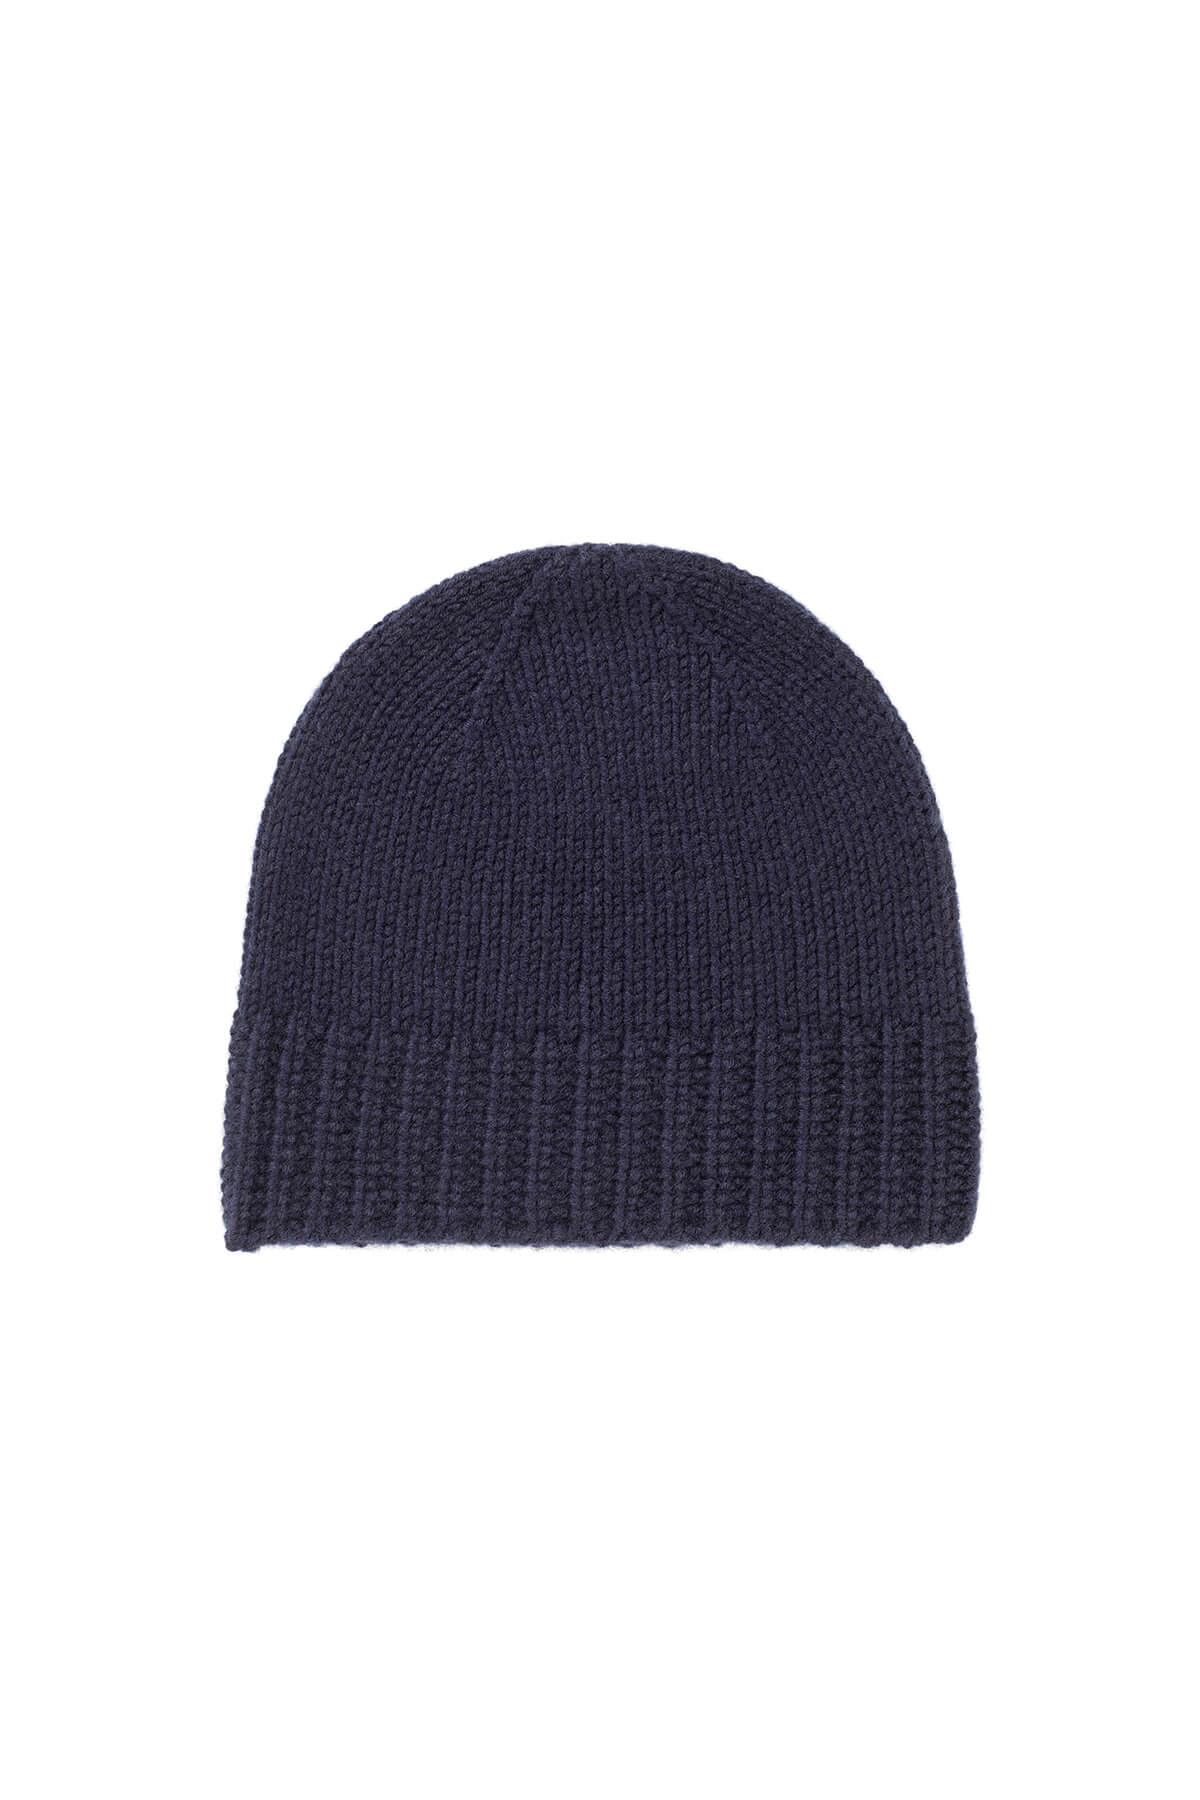 Johnstons of Elgin’s Navy Cashmere Chunky Rib Beanie on white background HAT03246SD0707